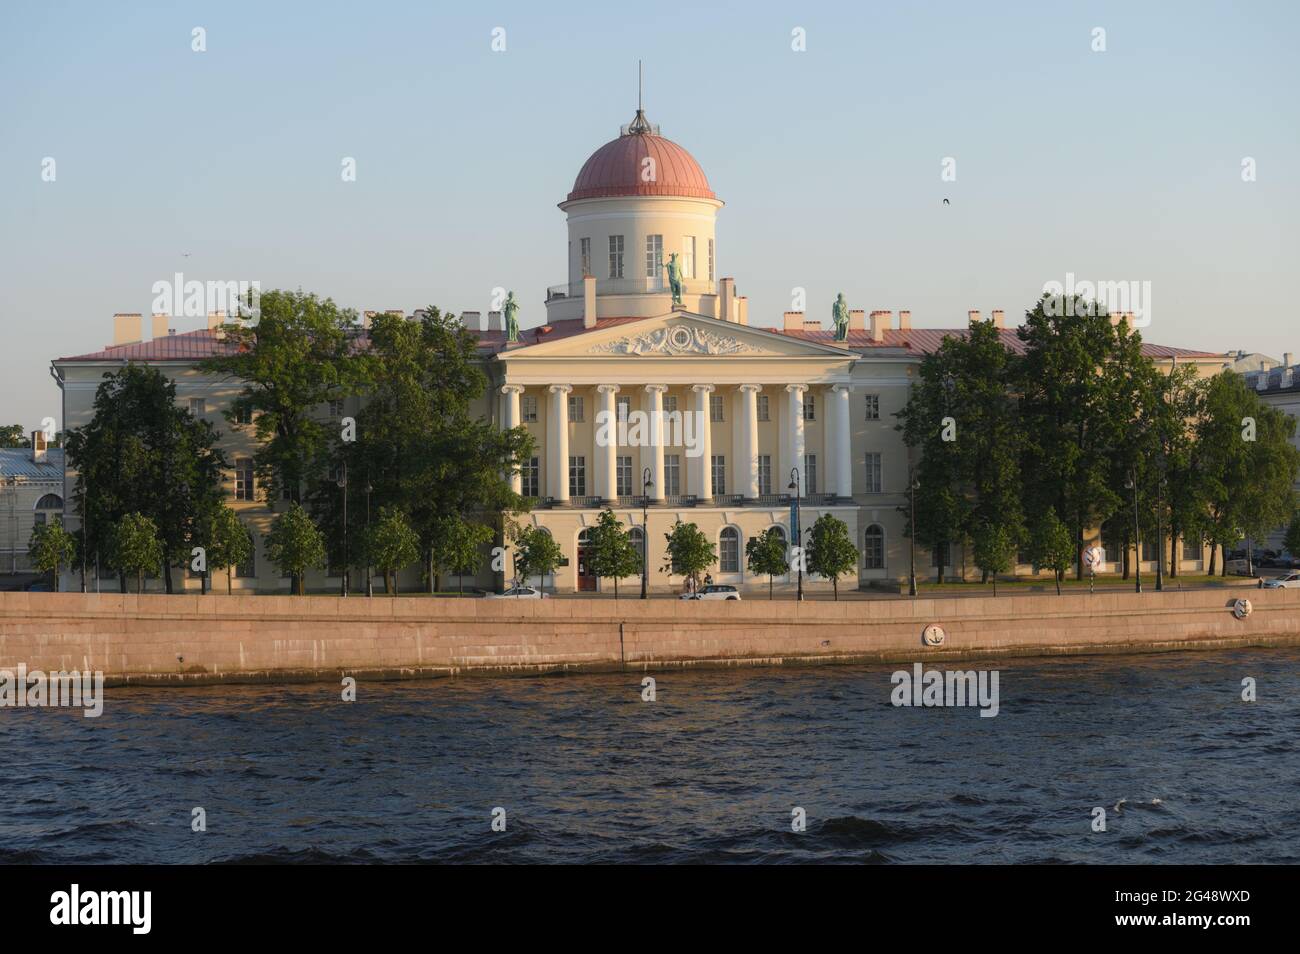 Building of the Literary Museum of the Institute of Russian Literature on Makarov embankment in St. Petersburg, Russia Stock Photo